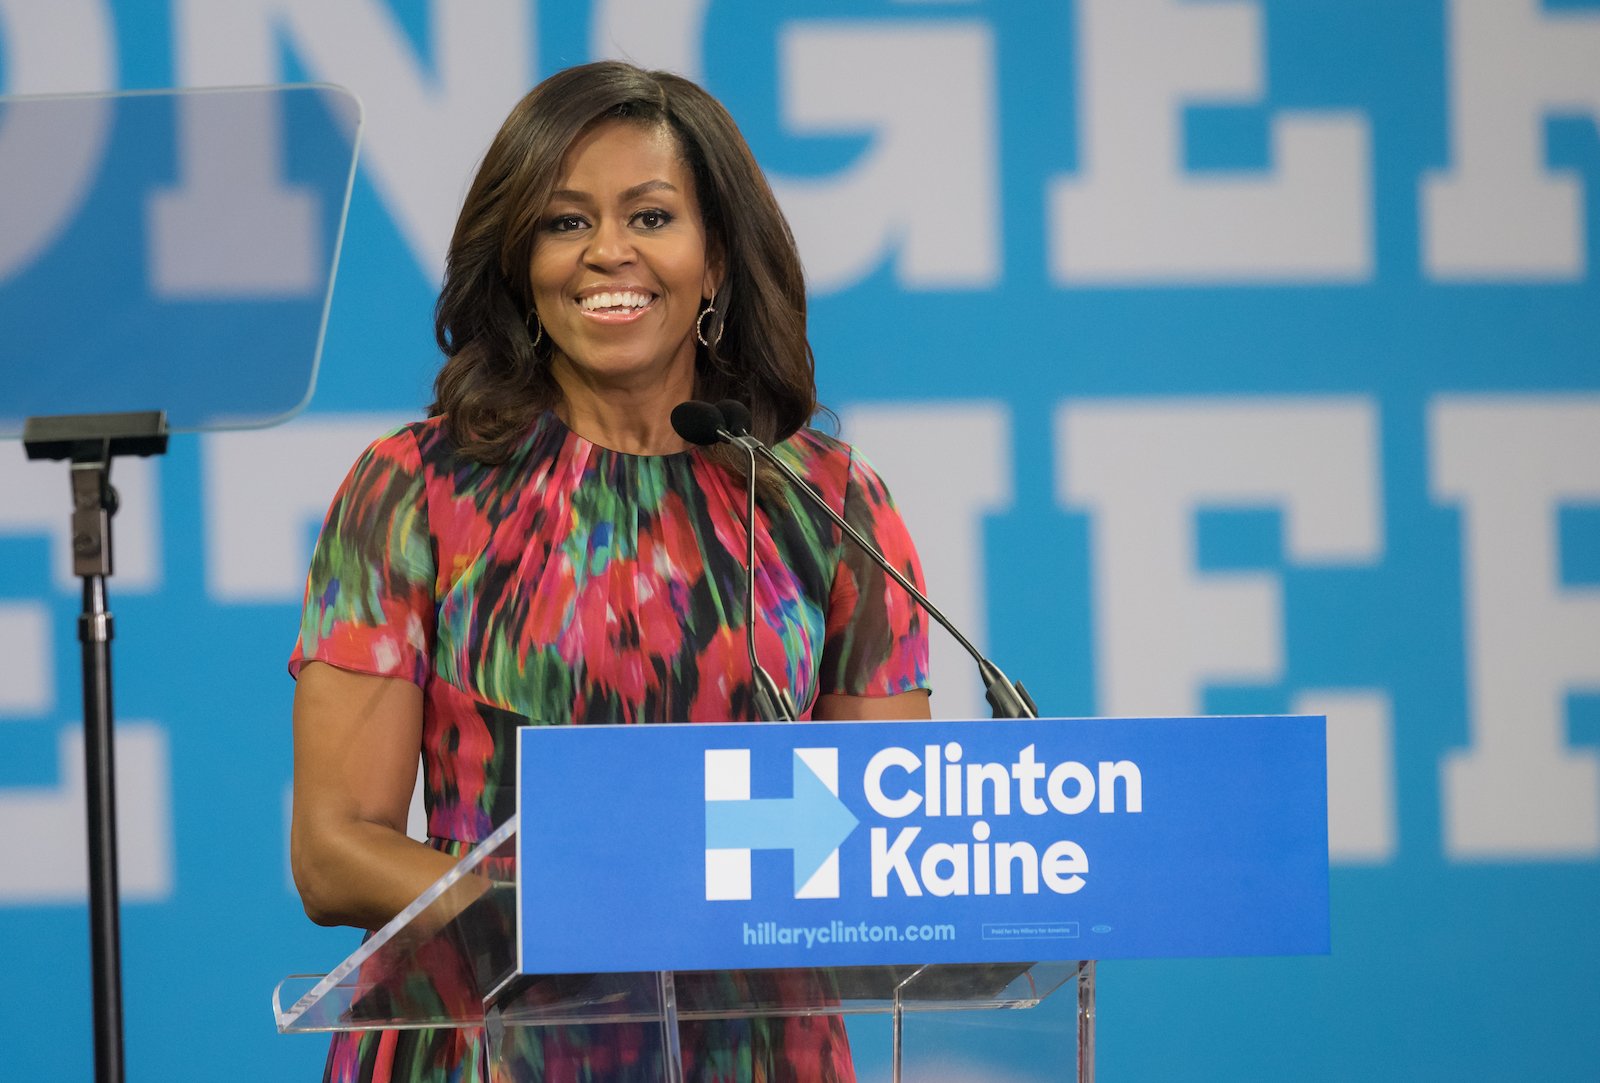 <p>Michelle Obama is a name that resonates with grace, intelligence, and strength. But beyond her public persona, there are many fascinating aspects of her life that you might not know about. Here are some intriguing things about the former First Lady of the United States.</p>